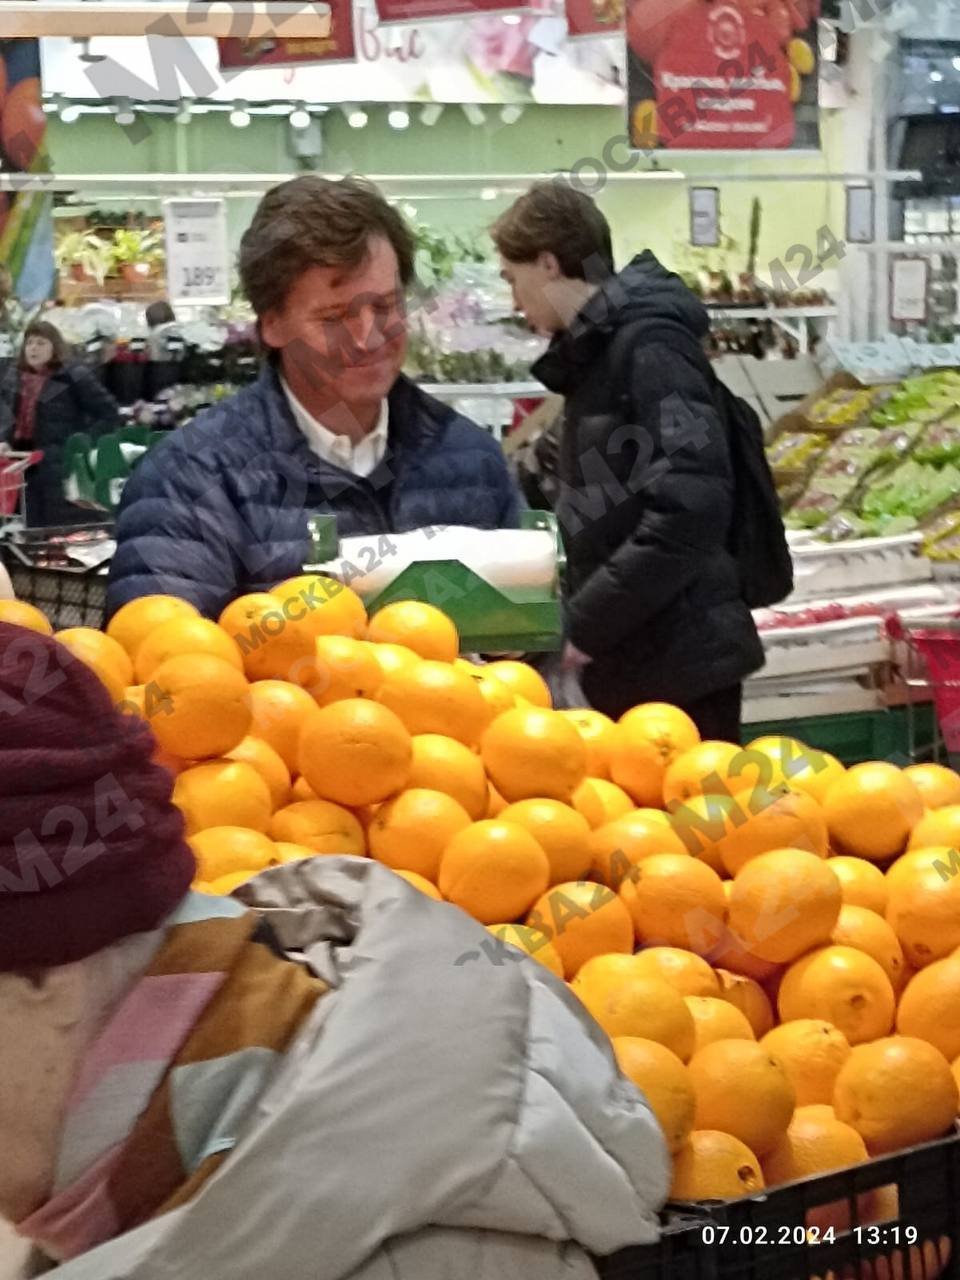 Carlson admiring oranges at a Moscow supermarket. Photo: Moscow 24 TV channel